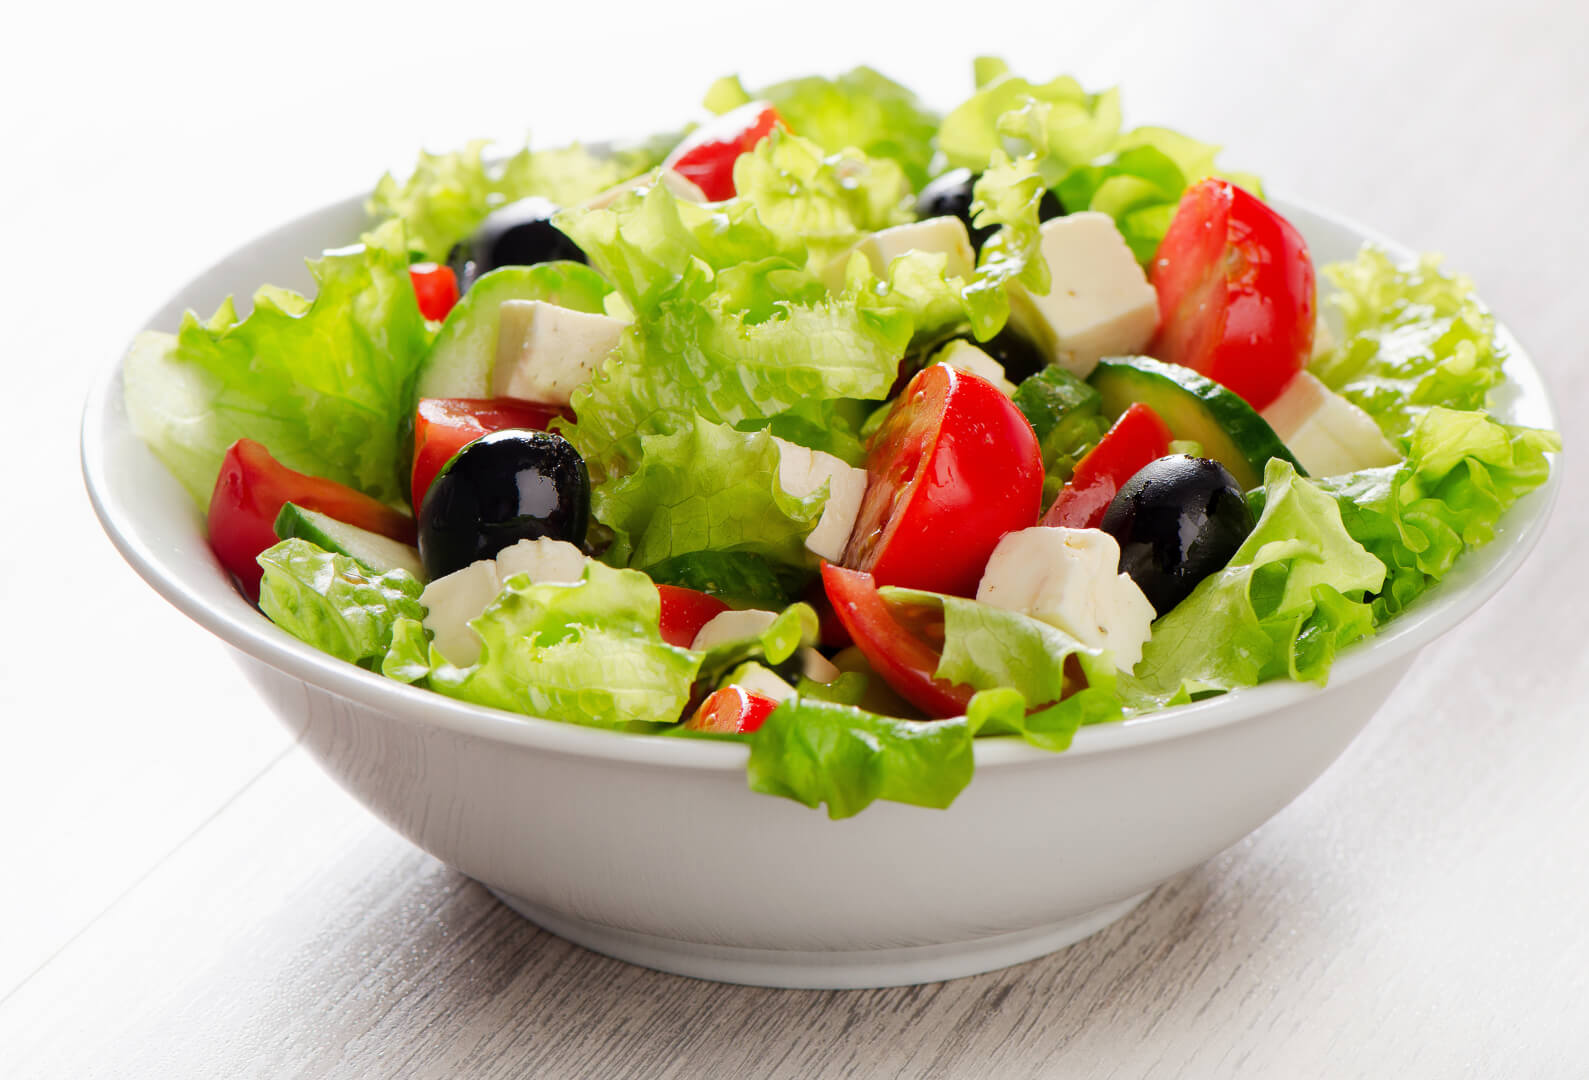 Fresh vegetables salad with feta, olives and tomato.